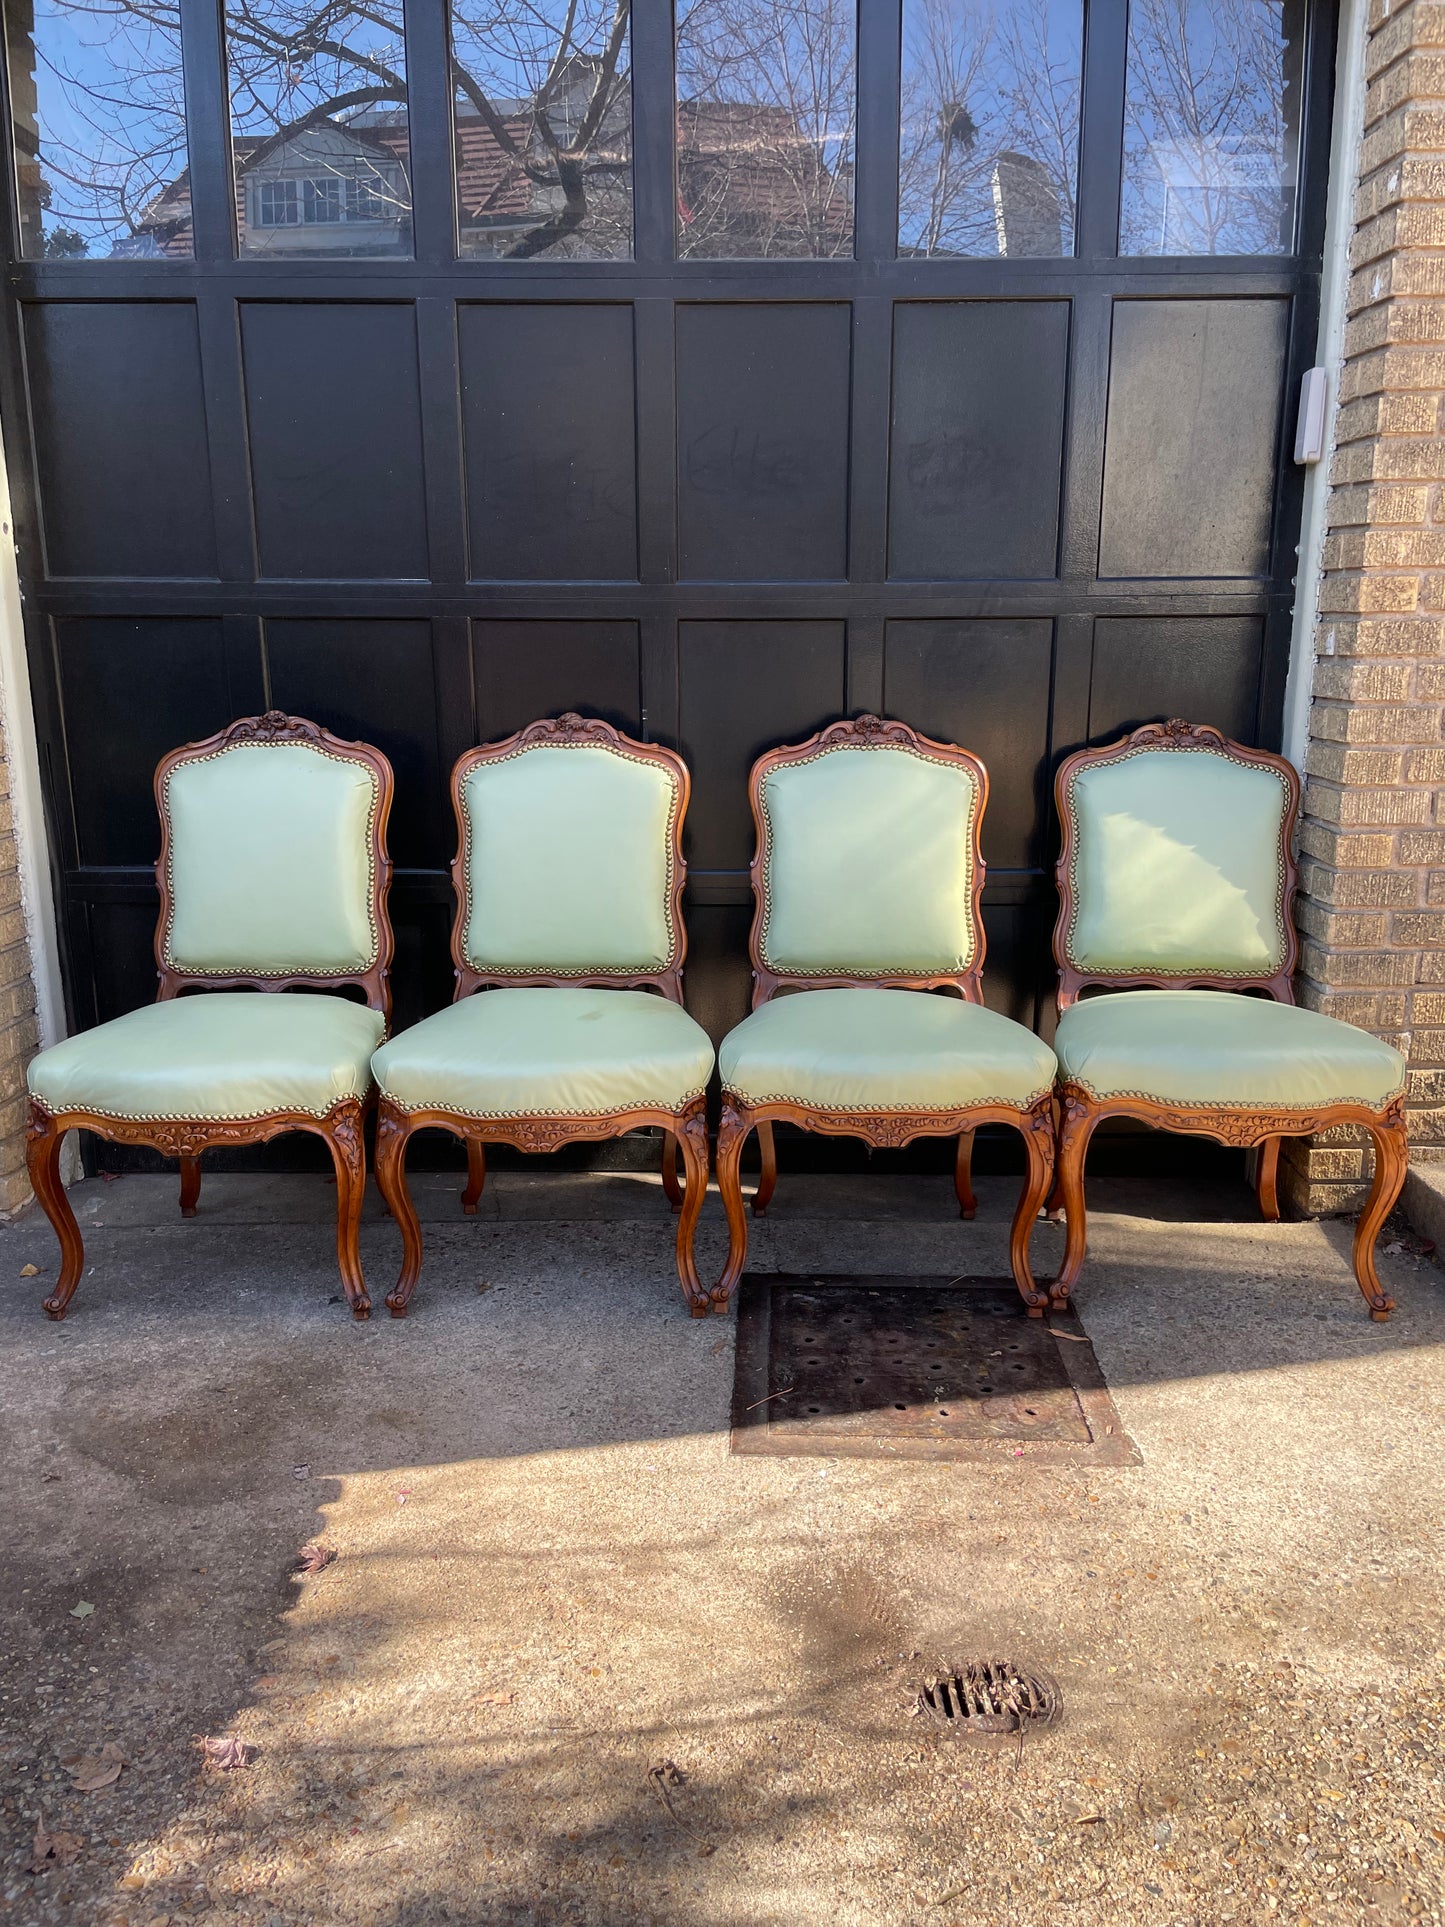 Antique chairs upholstered in pistachio leather, Louis XV